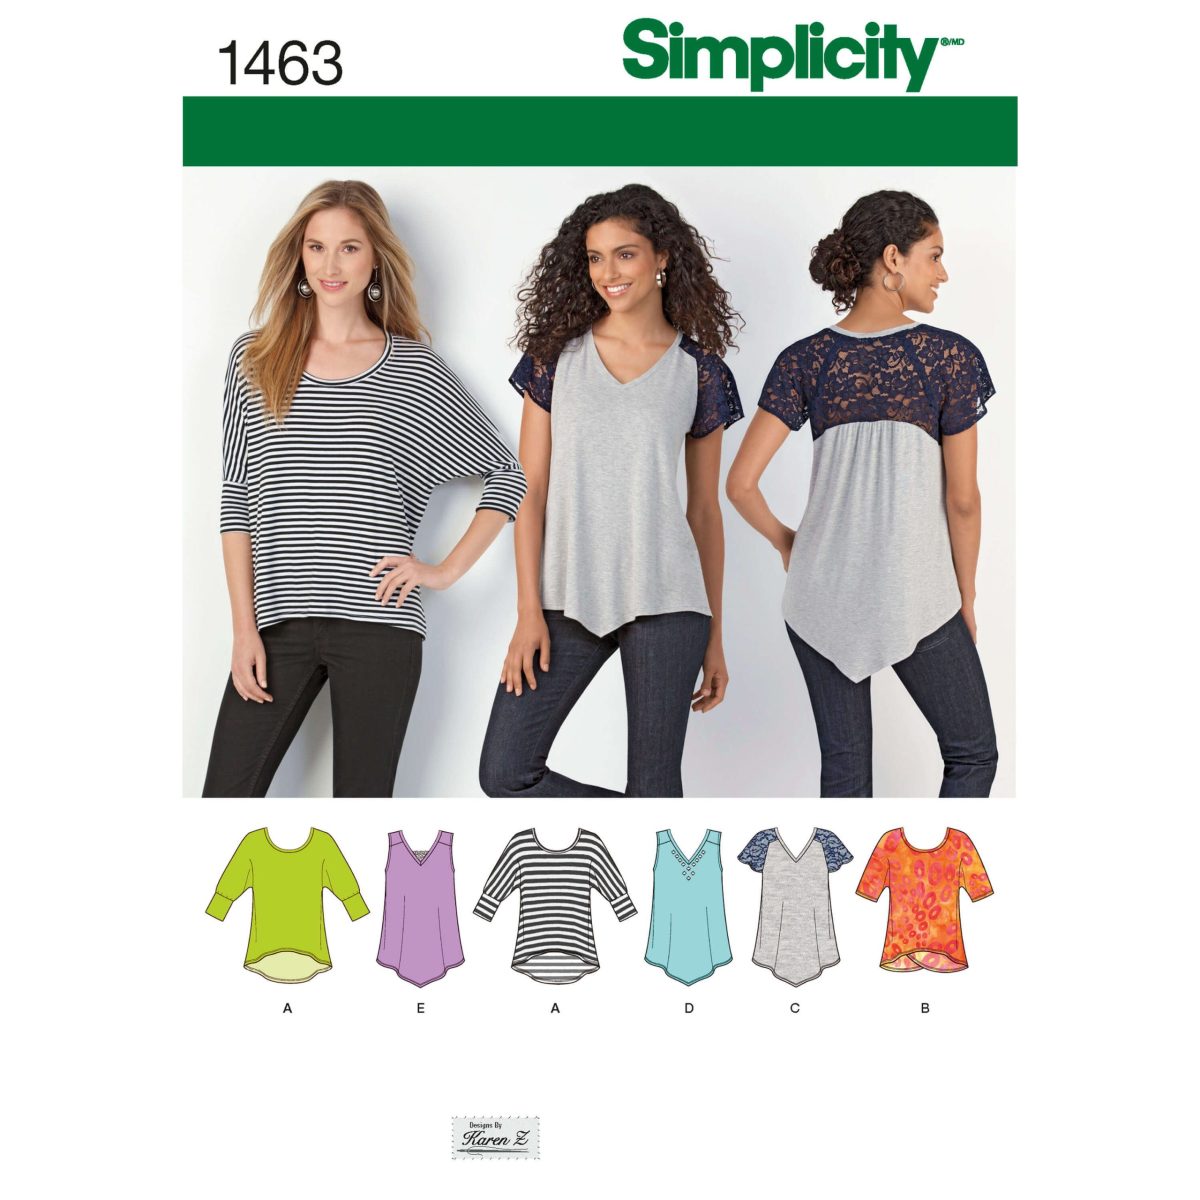 Simplicity Sewing Pattern 1463 Misses' Knit Tops